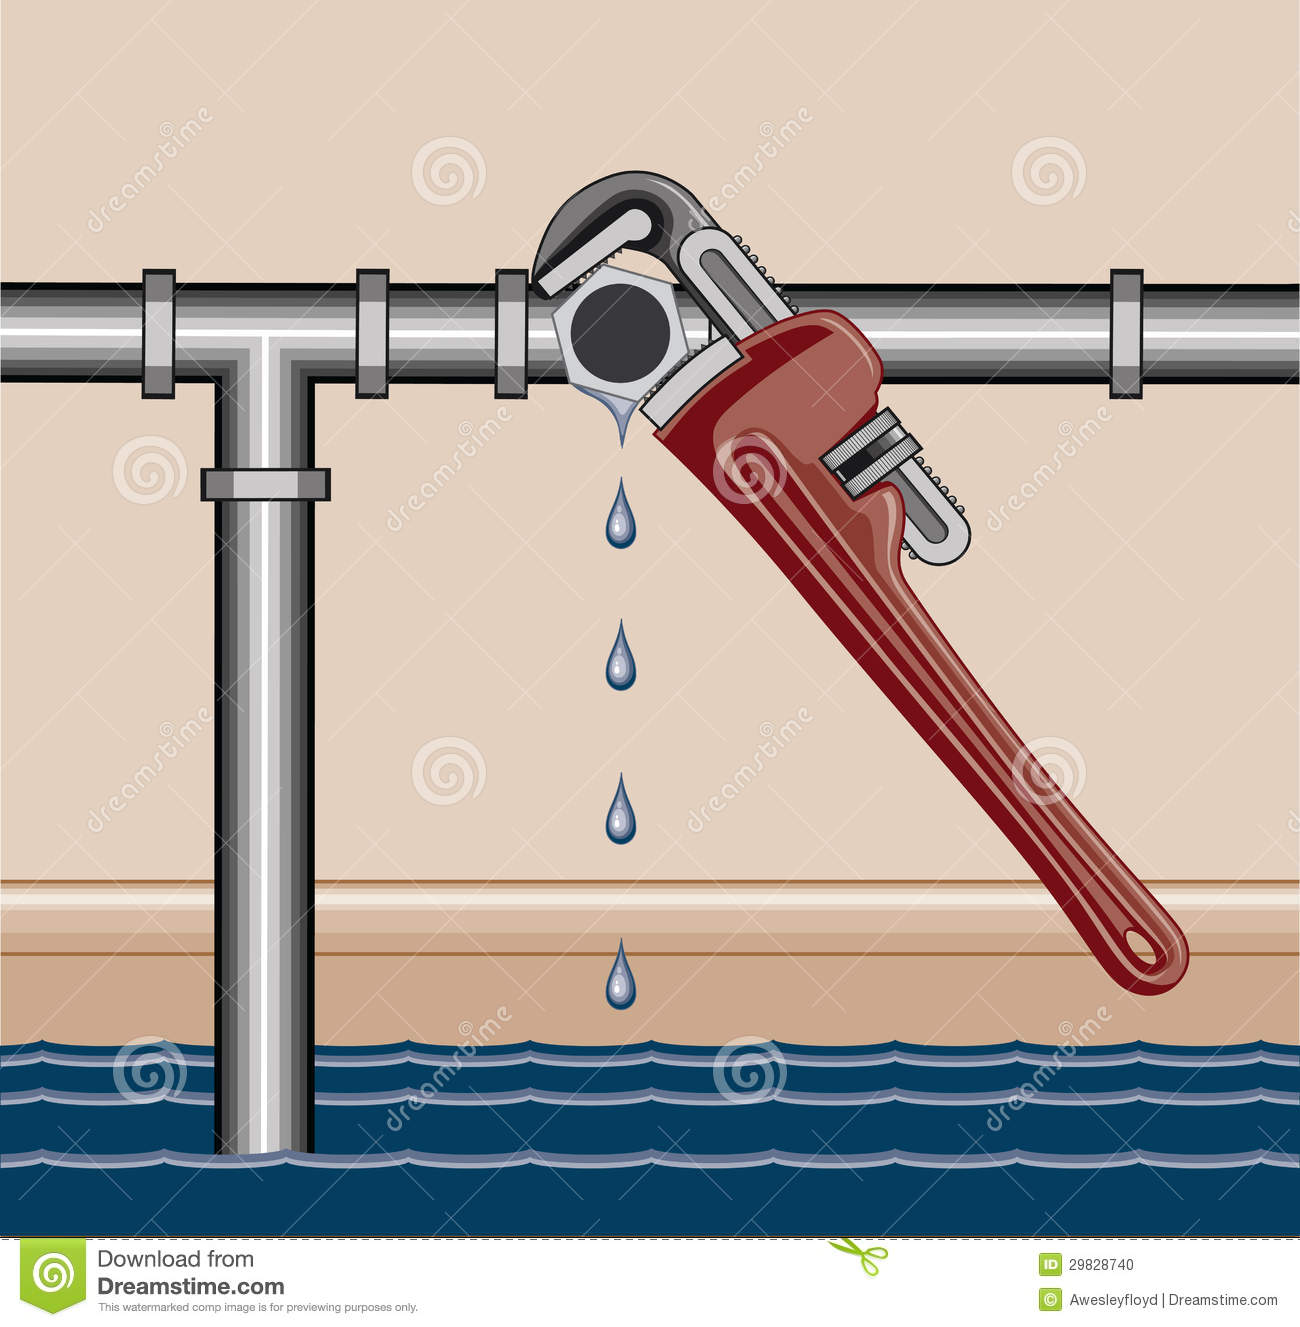 Illustration Of A Leaking Water Pipe Being Repaired Using A Plumbers